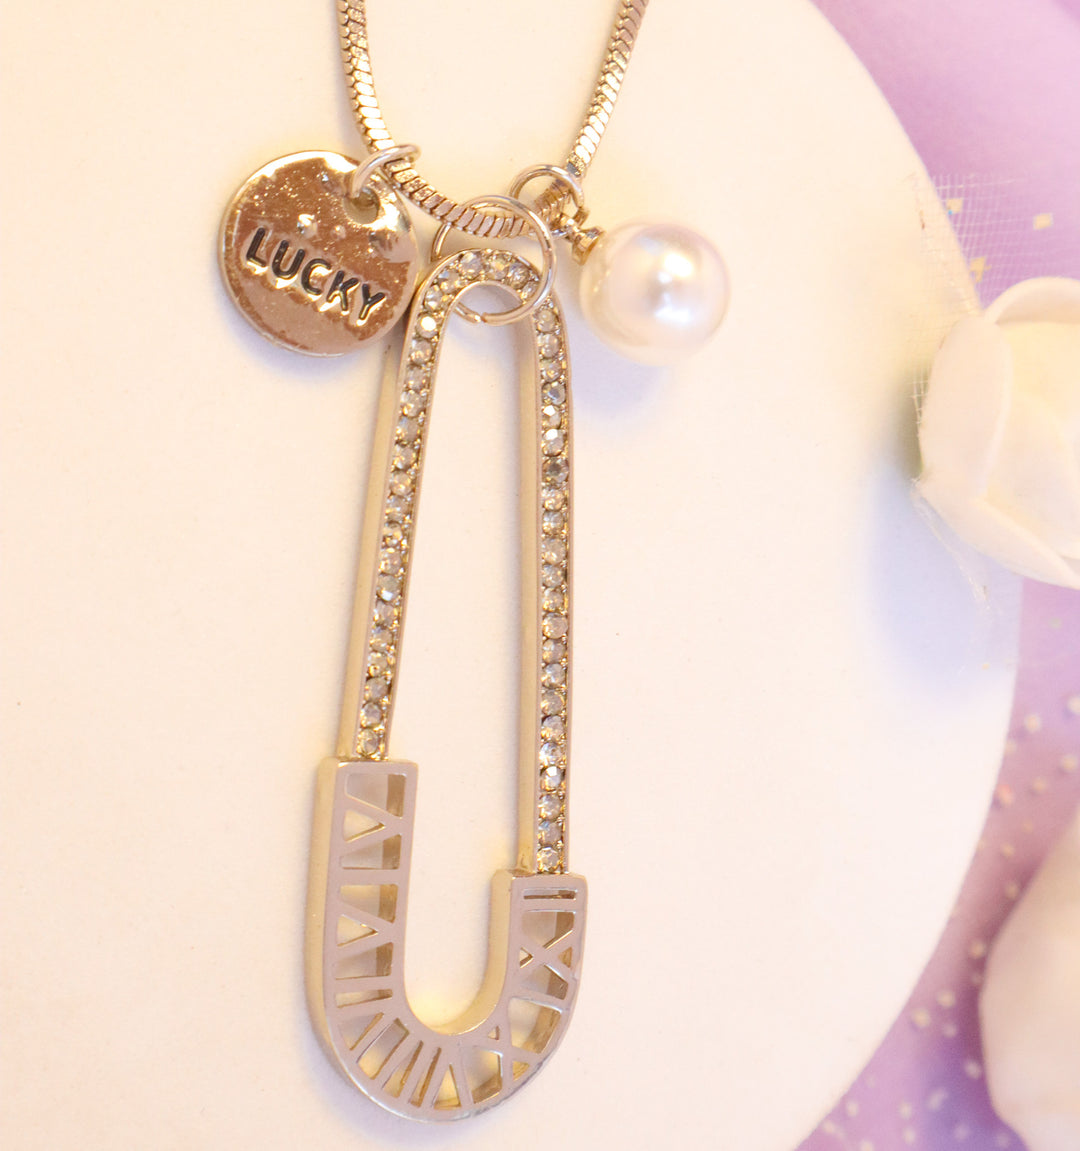 Lucky Safety Pin Necklace - Gold